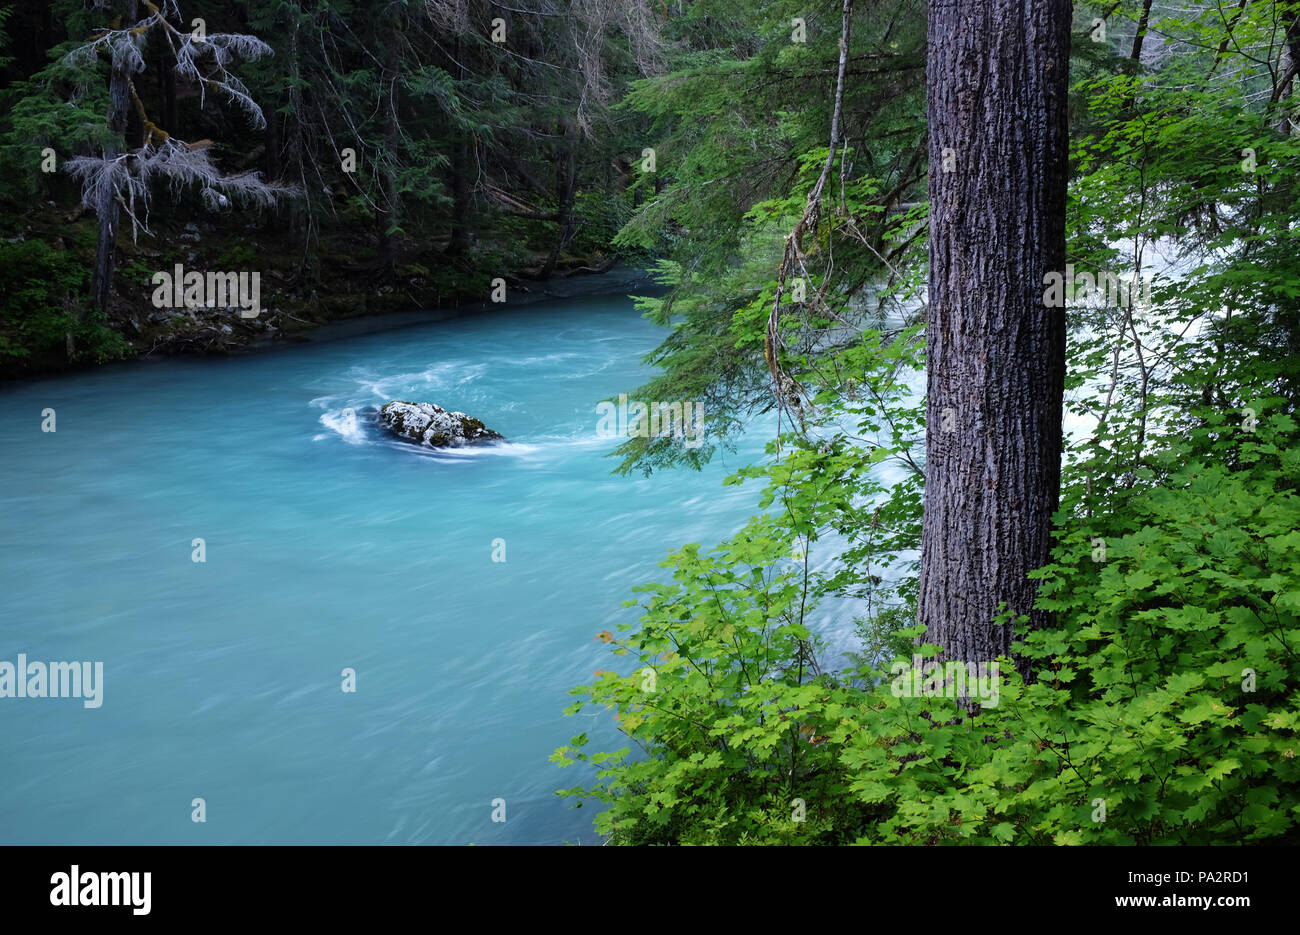 Thunder Creek flowing through old growth forest, North Cascades National Park, Washington State, USA Stock Photo